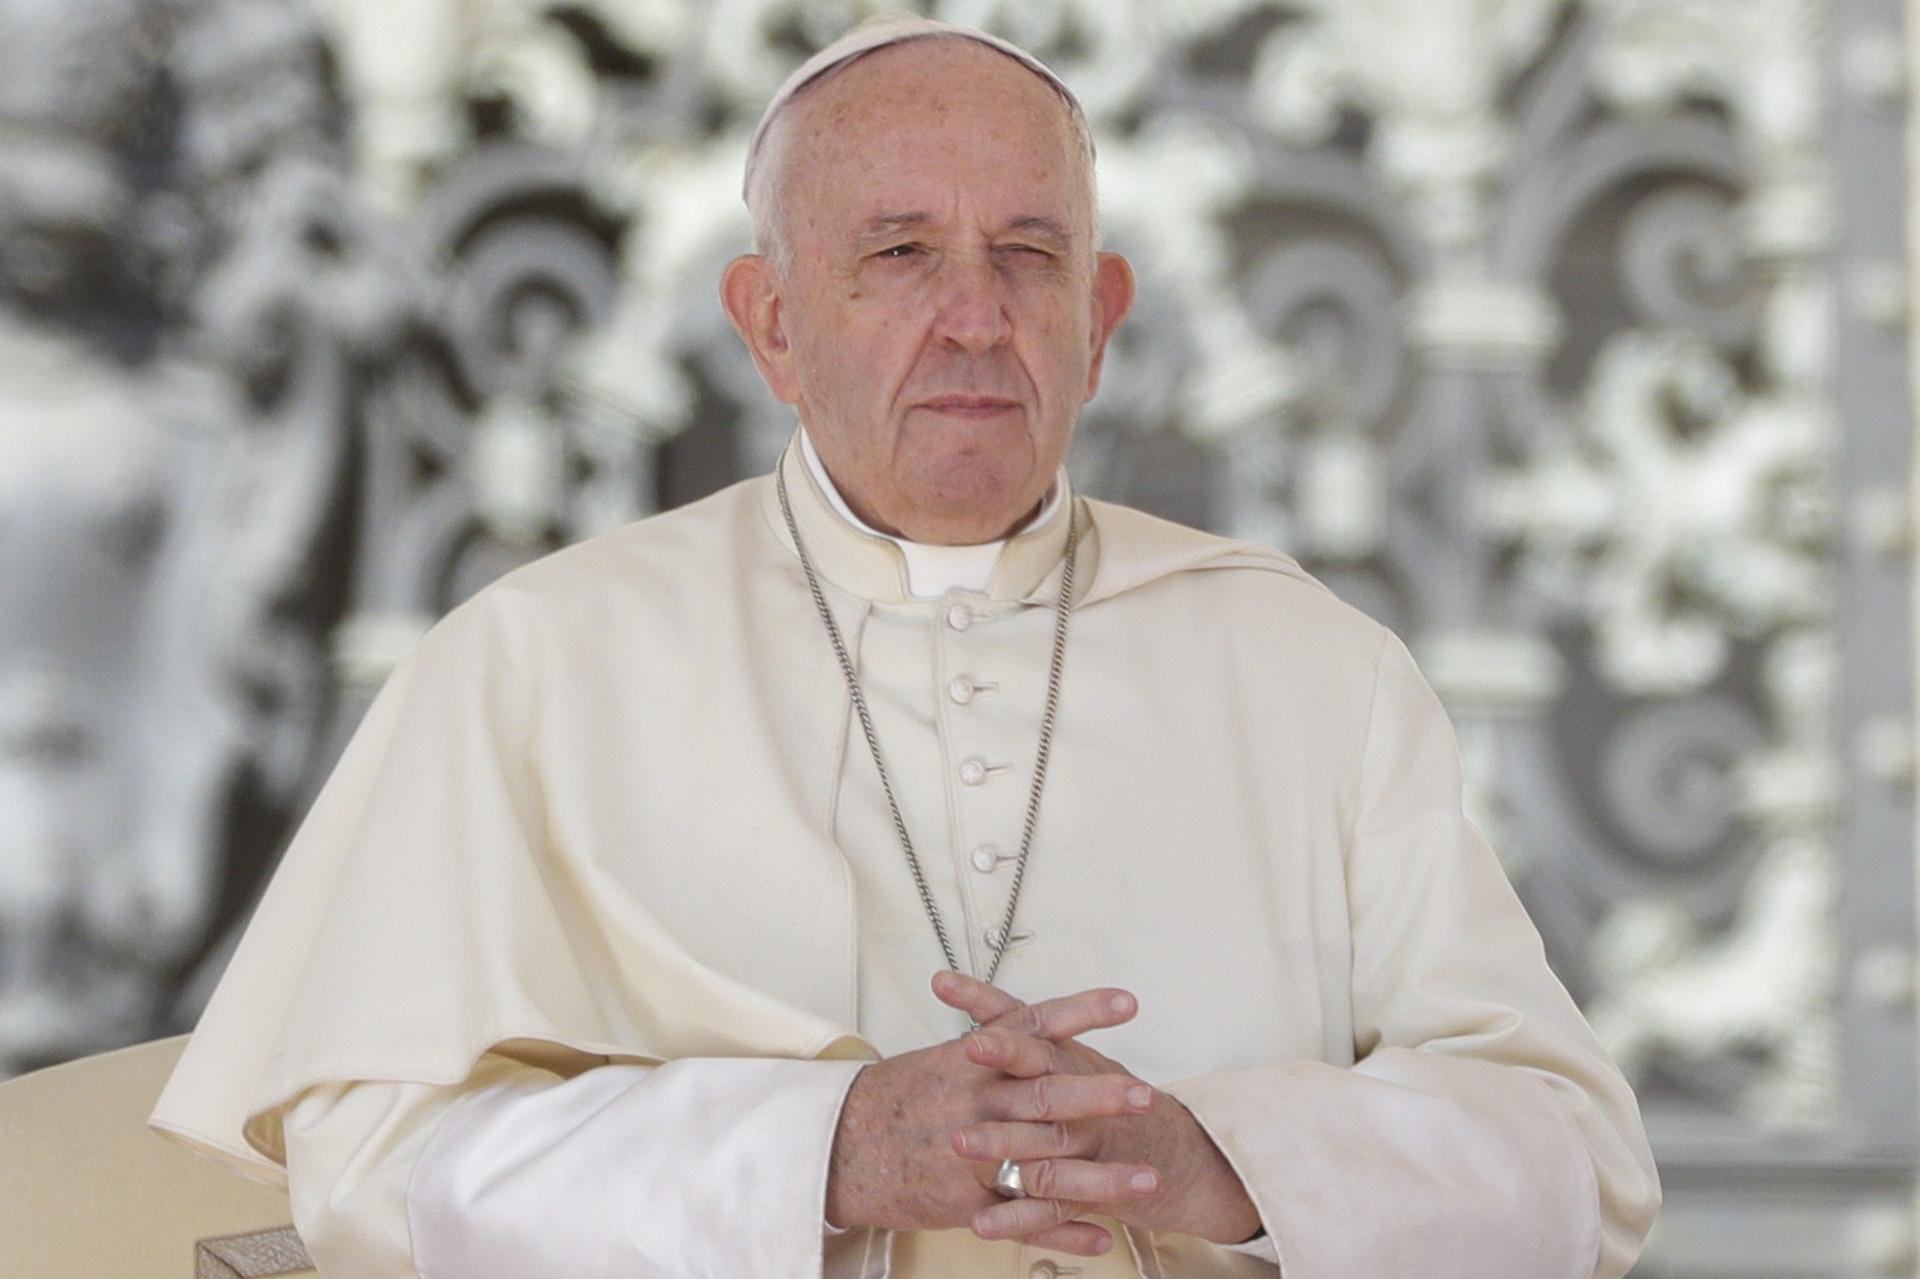 Beyond the US, the Top Five countries for beefs with the Pope